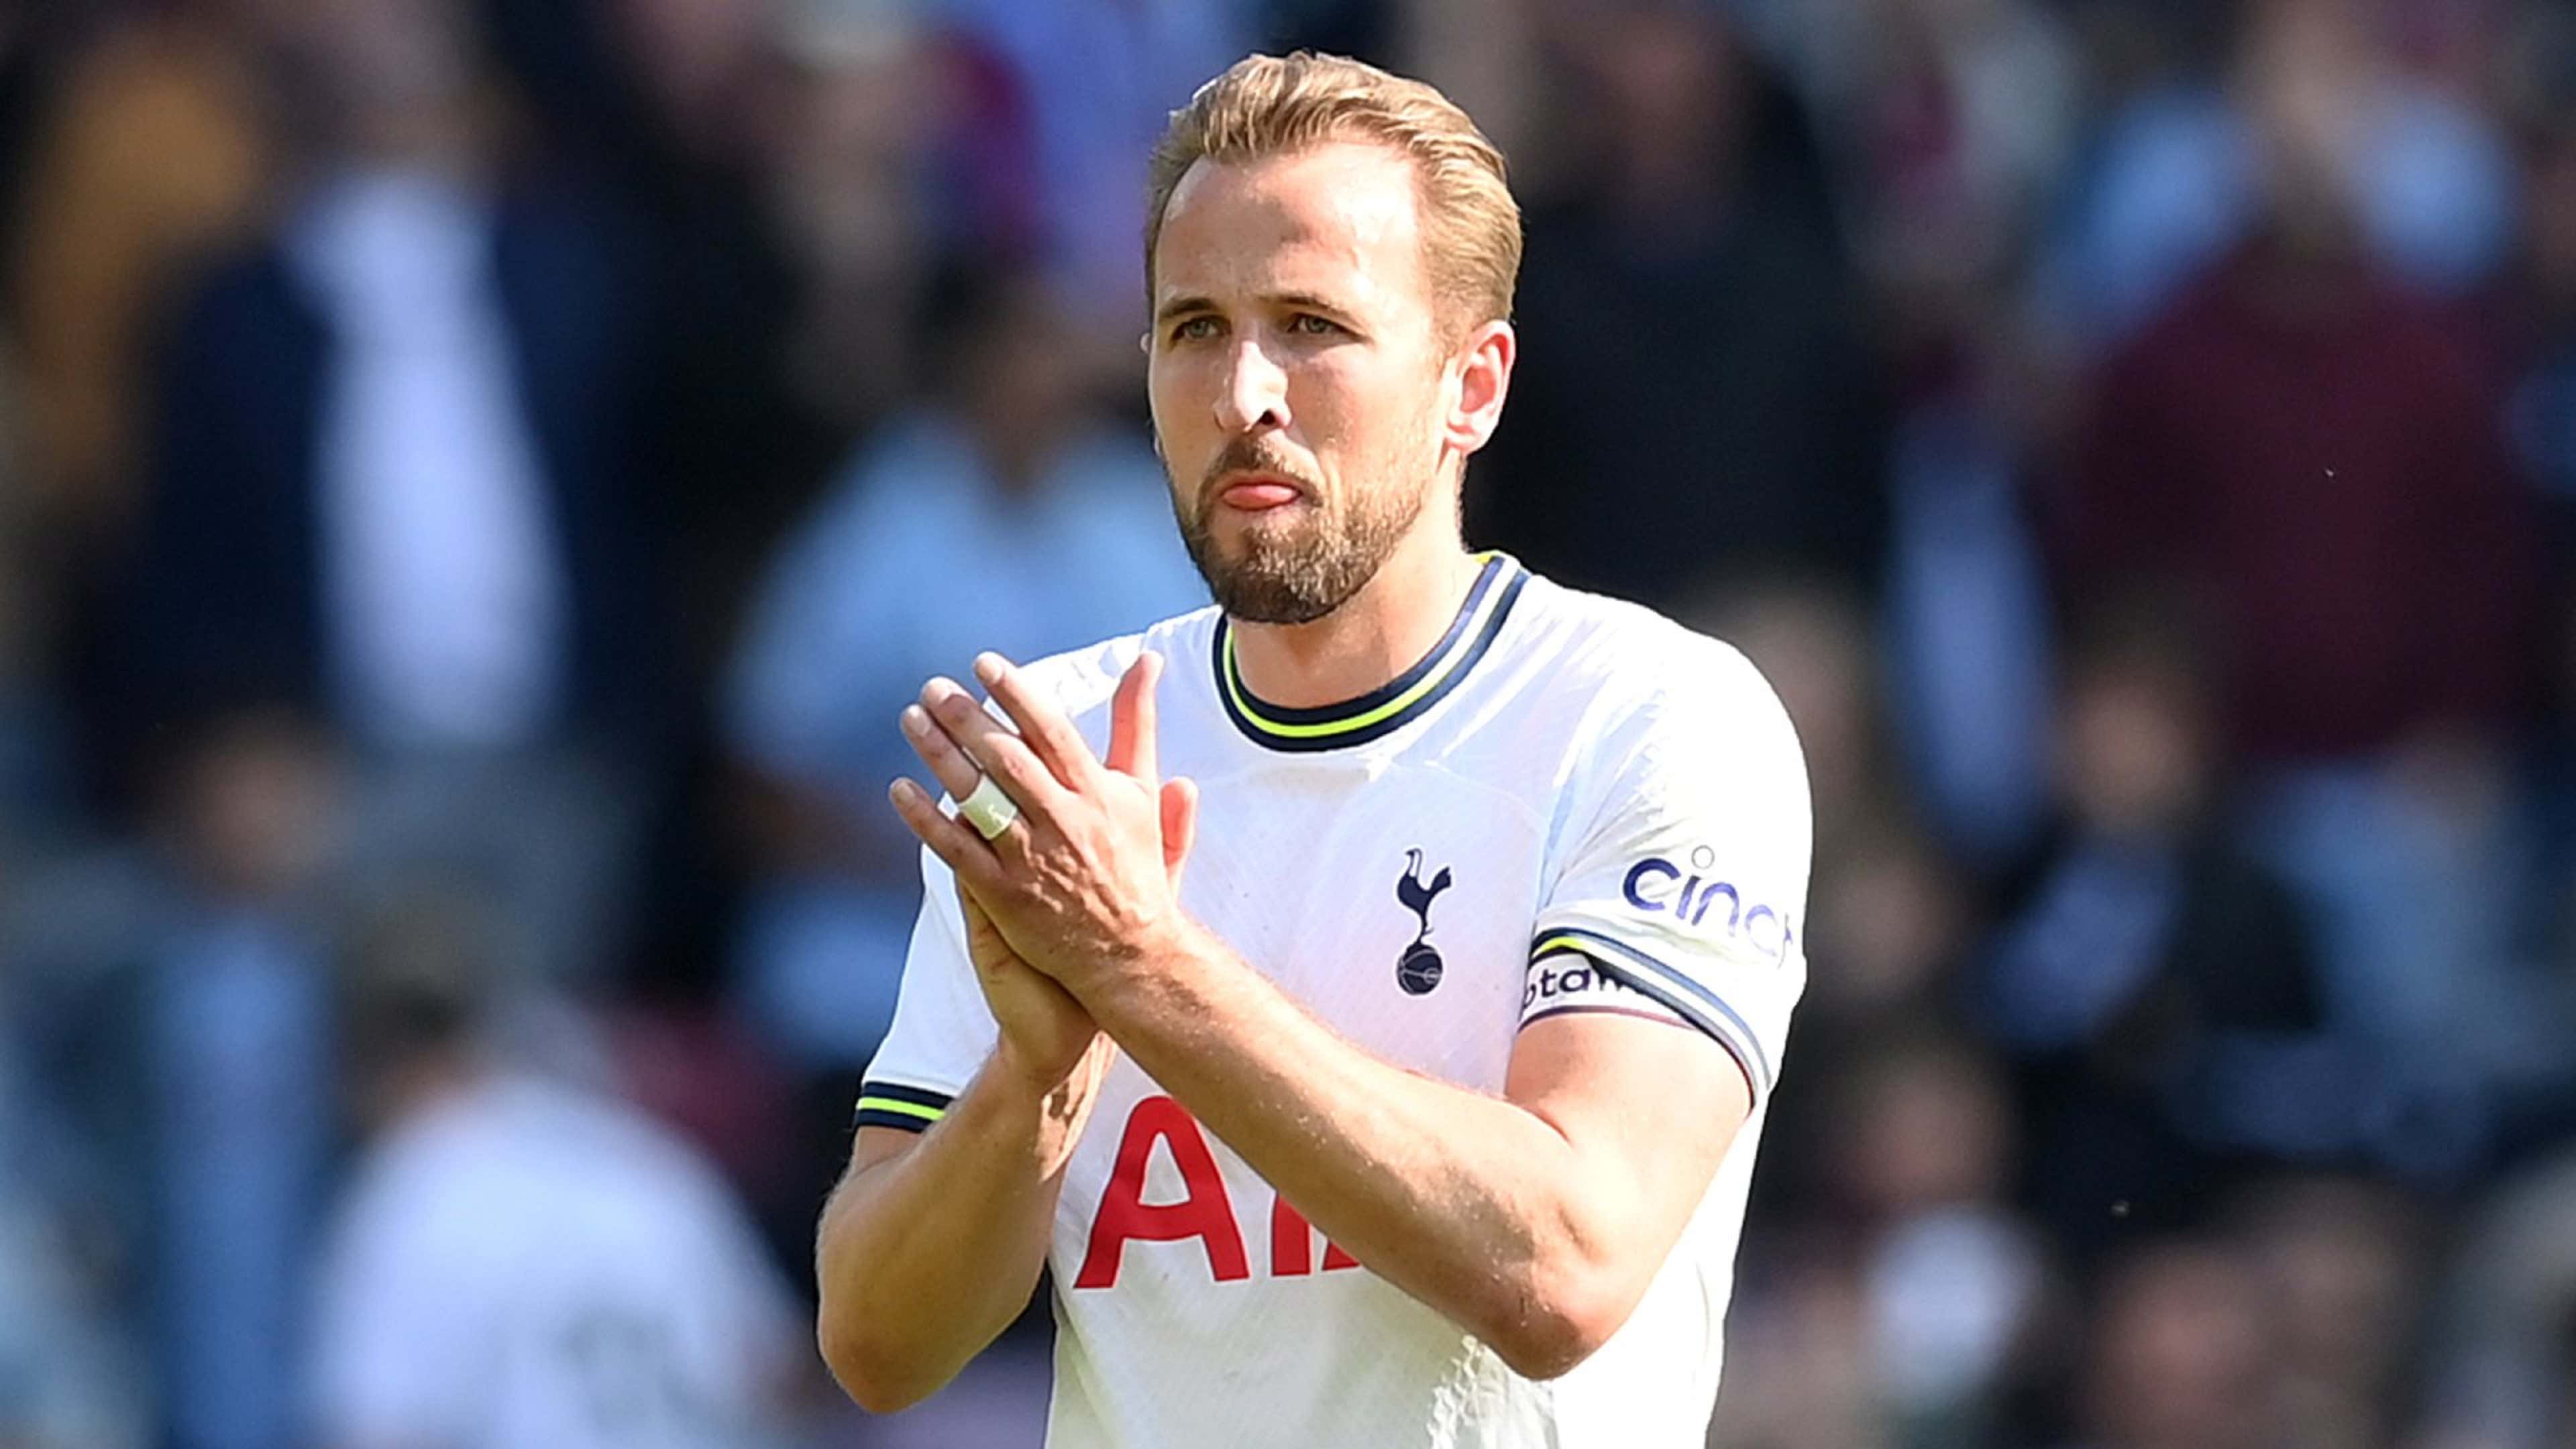 Harry Kane has not given up on Man Utd transfer this summer - but Red Devils have concerns over Tottenham's £100m asking price | Goal.com India